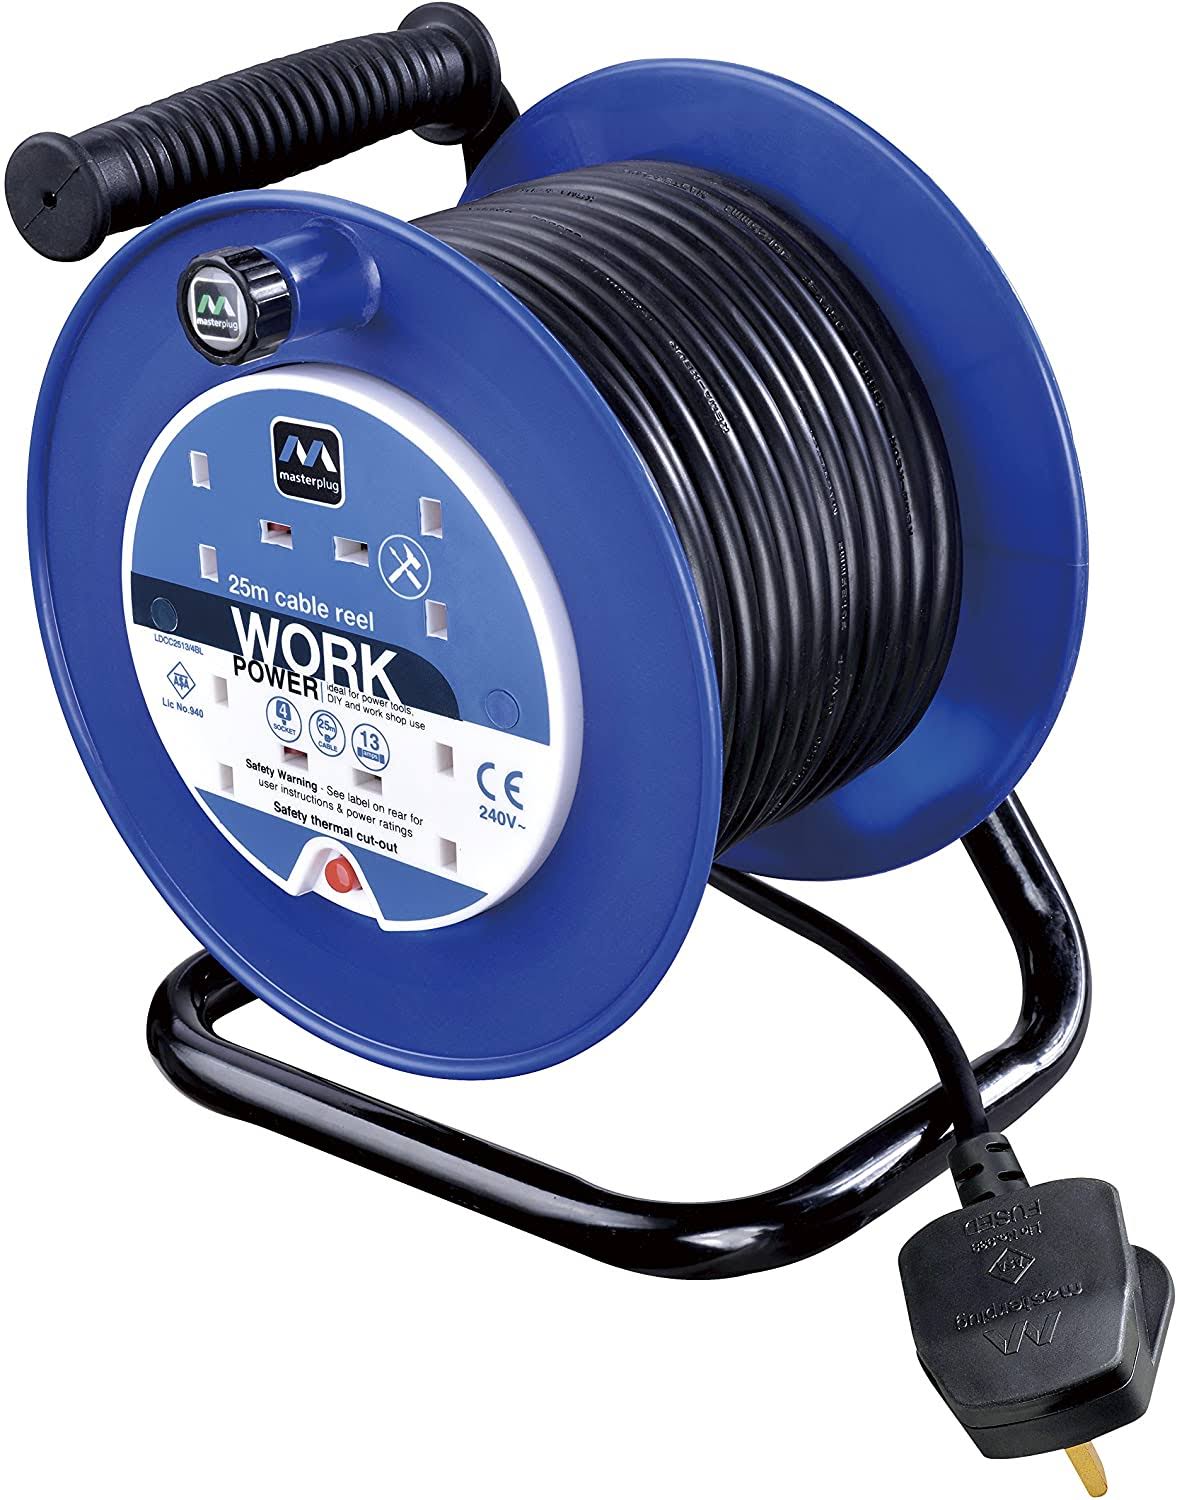 Masterplug Open Cable Reel - 4 Gang, 25m